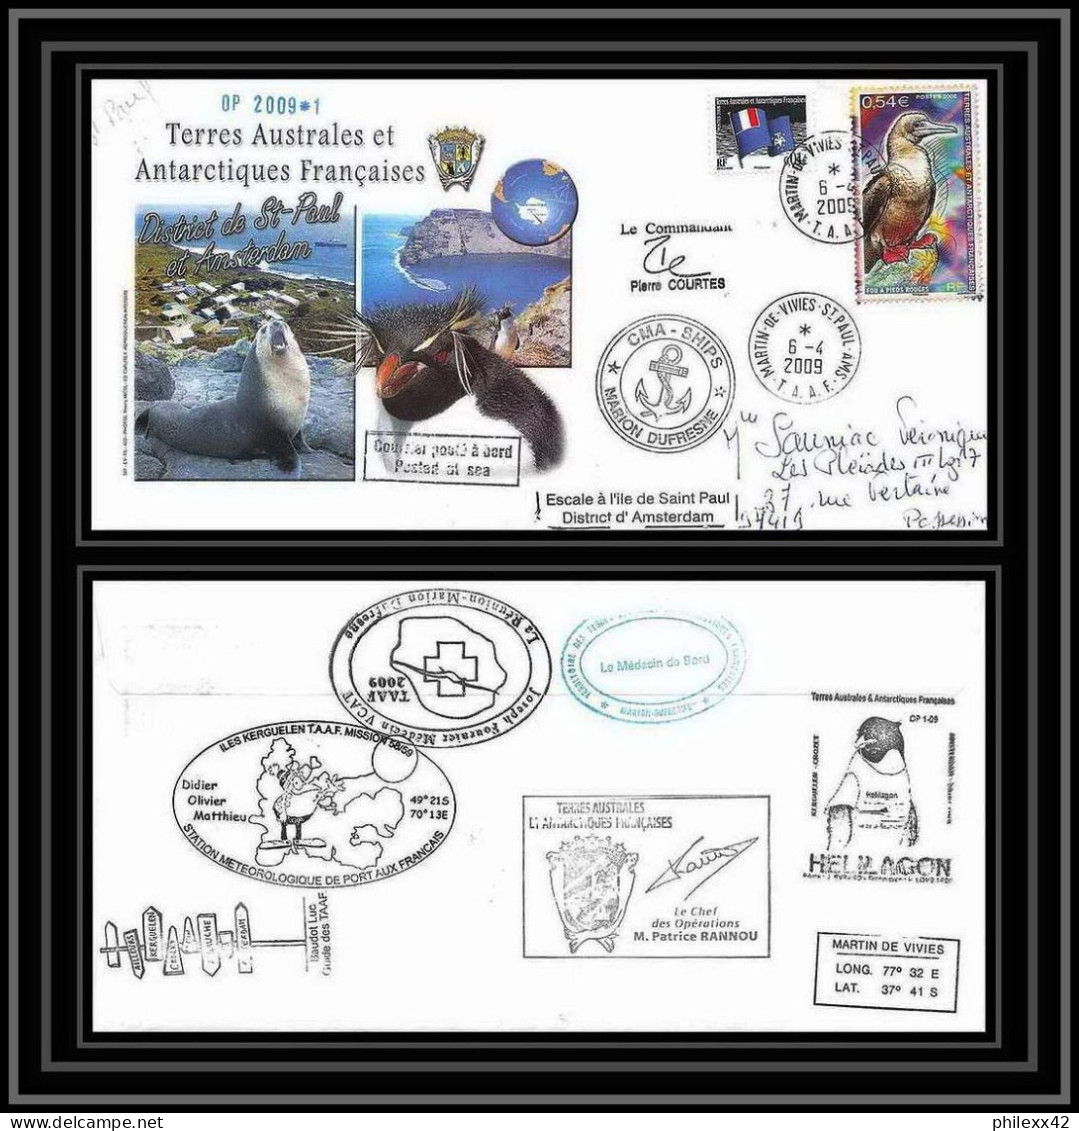 2904 Dufresne 2 Signé Signed OP 2009/1 St Paul 6/4/2009 N°515 Helilagon Terres Australes (taaf) Lettre Cover Fou Bird - Hélicoptères